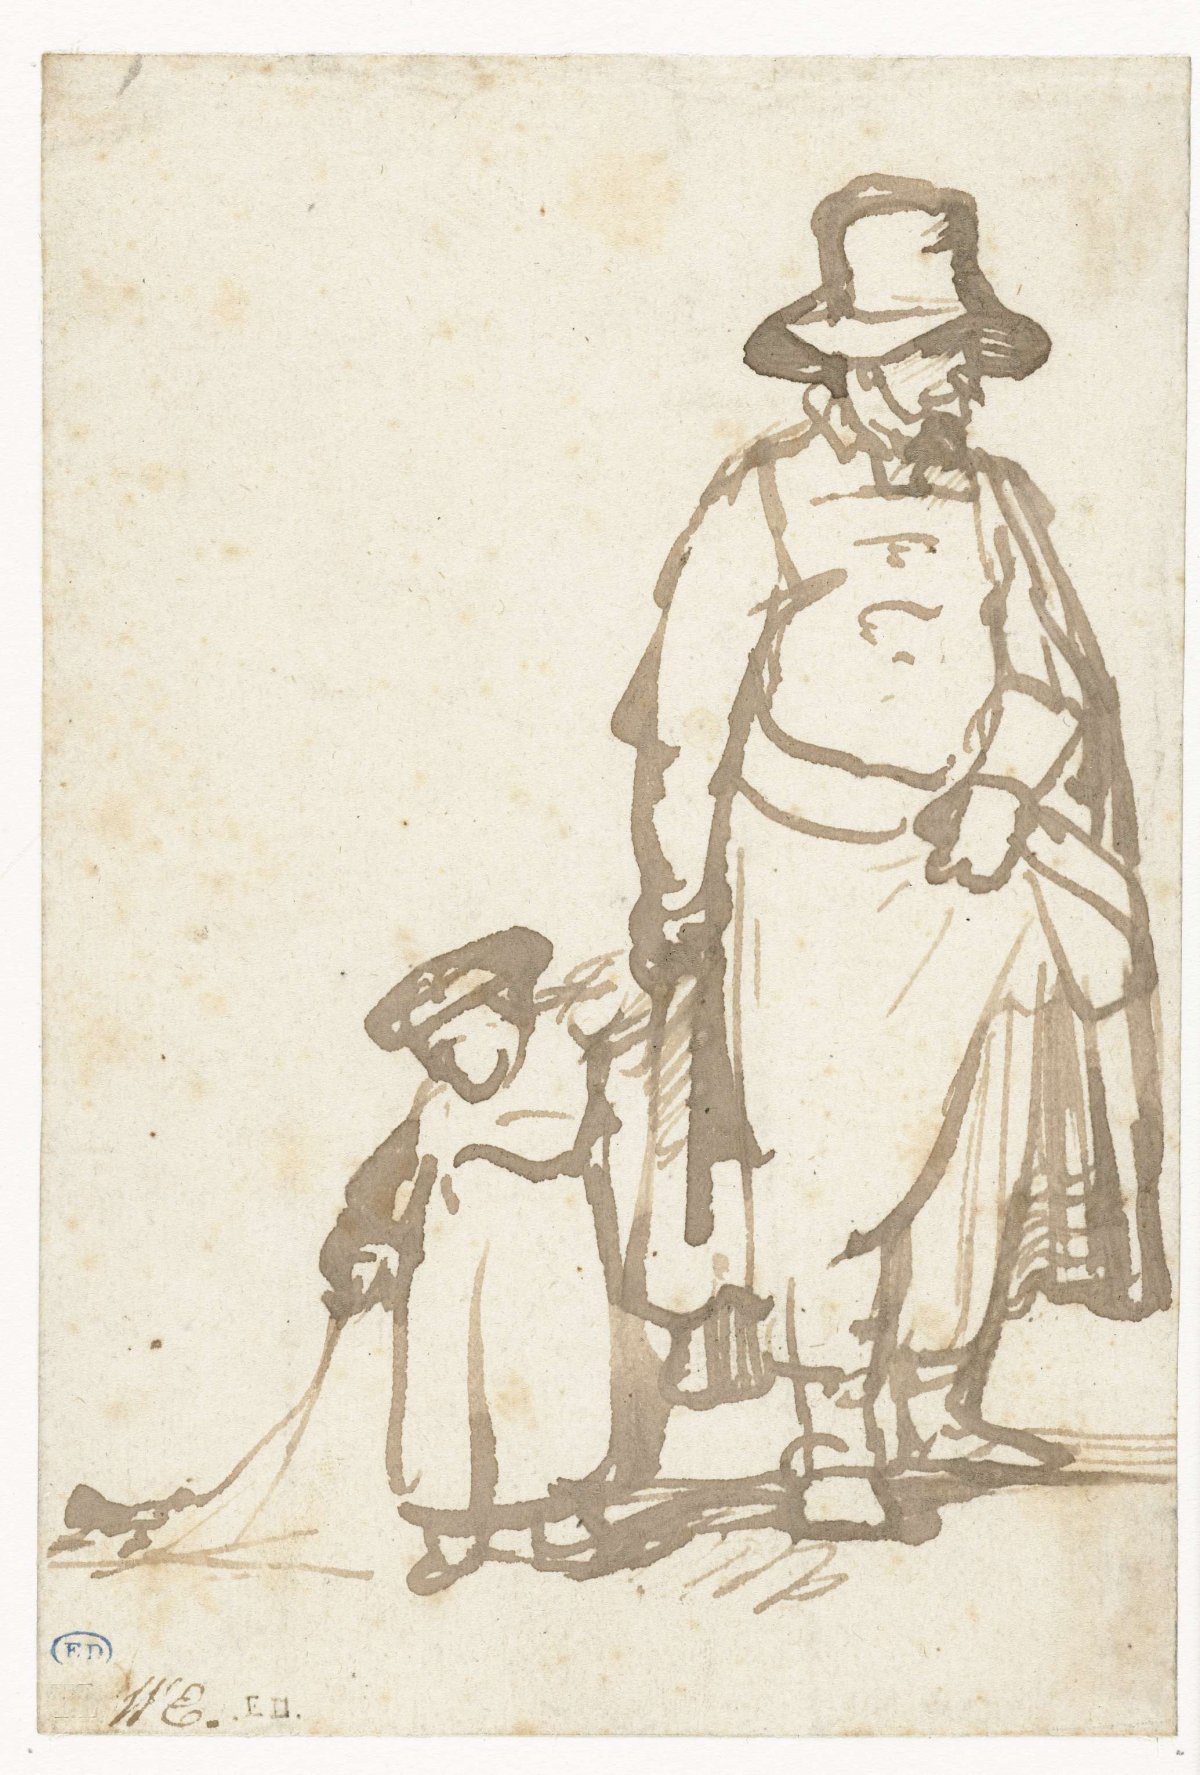 Standing man with a child by the hand, Rembrandt van Rijn, 1643